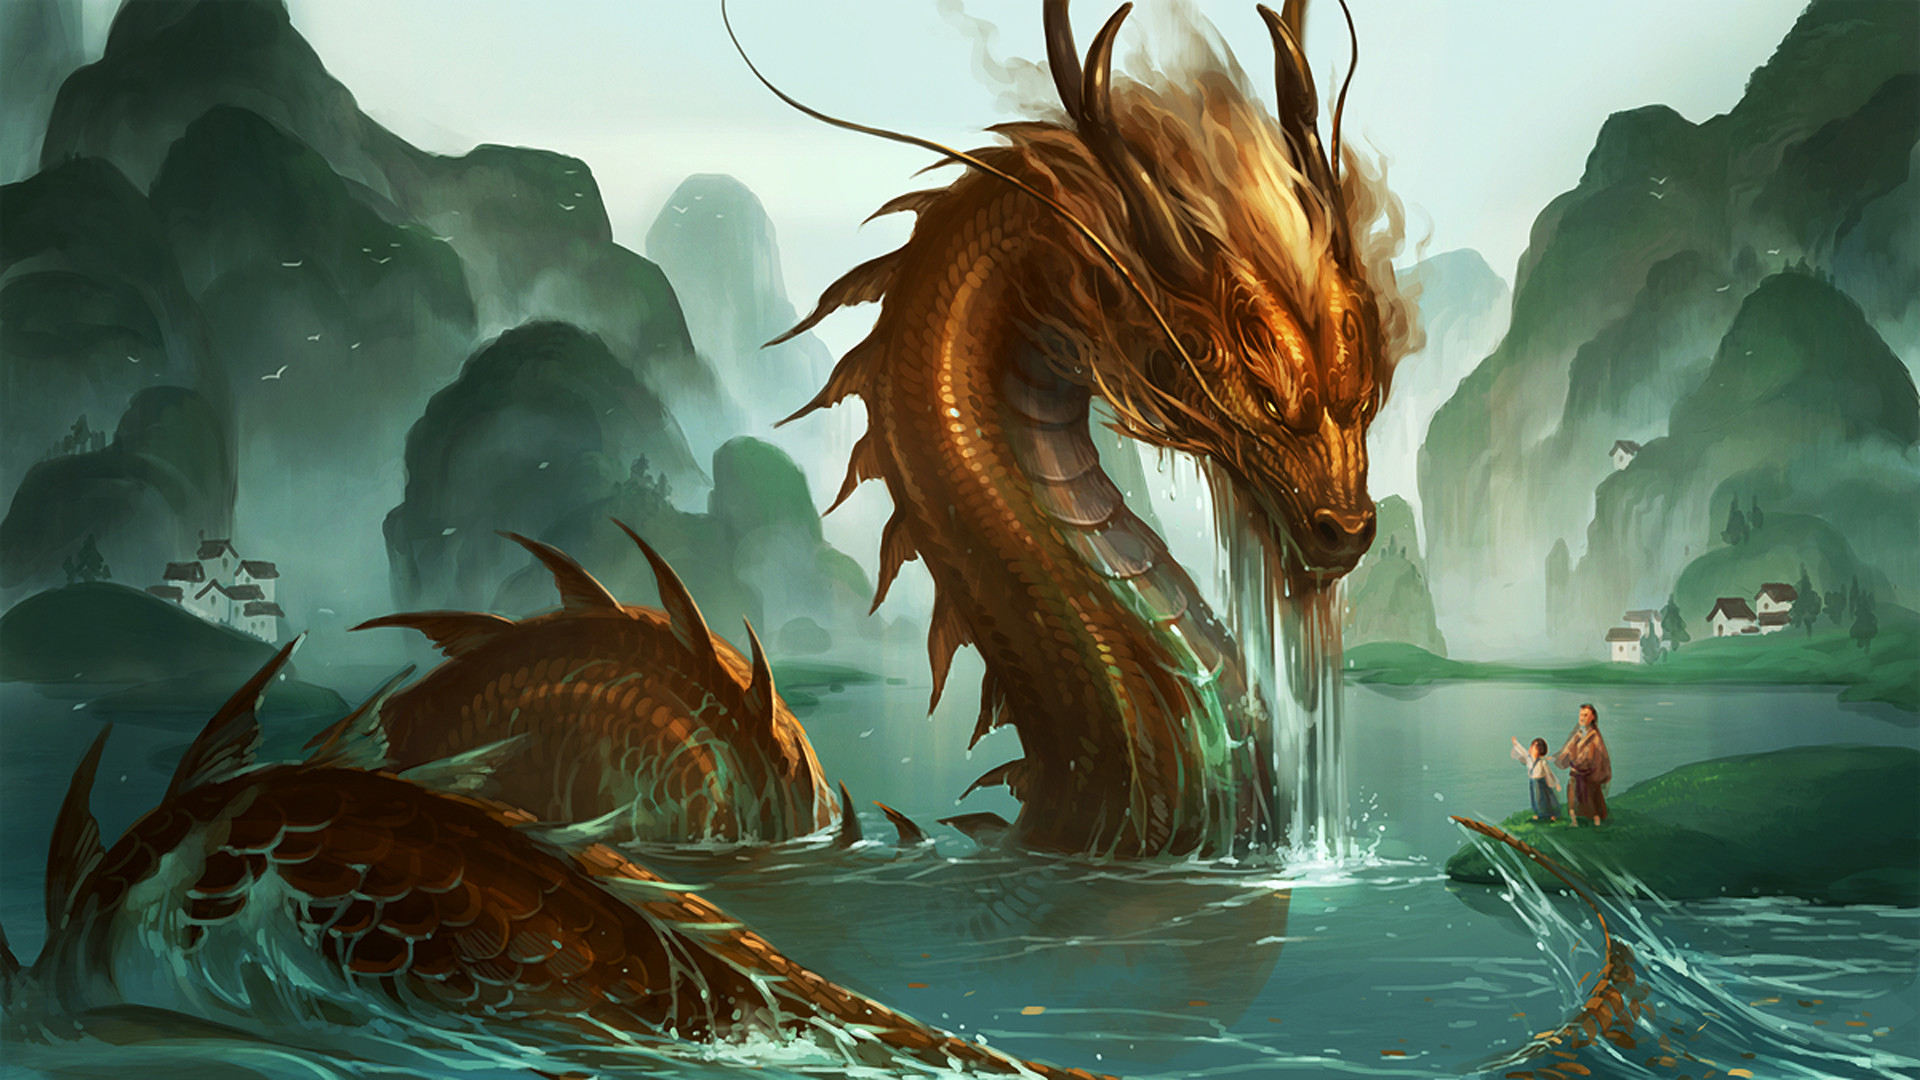 Cool 3D Dragon Wallpapers (55+ images)